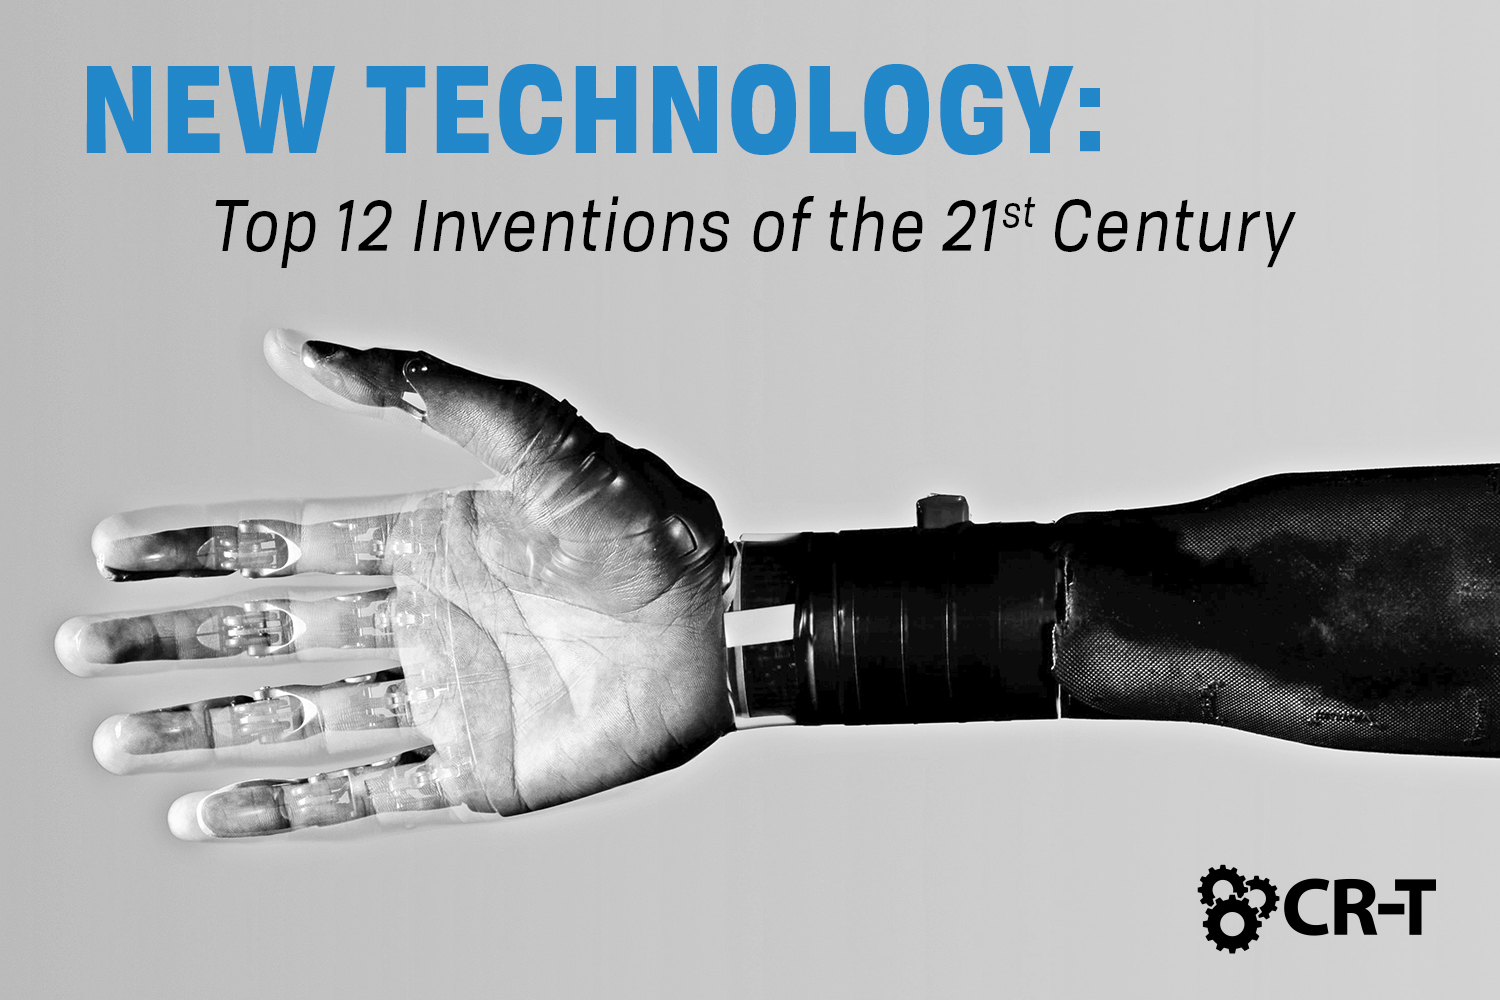 New Technology Top 12 Inventions of the 21st Century IT Services